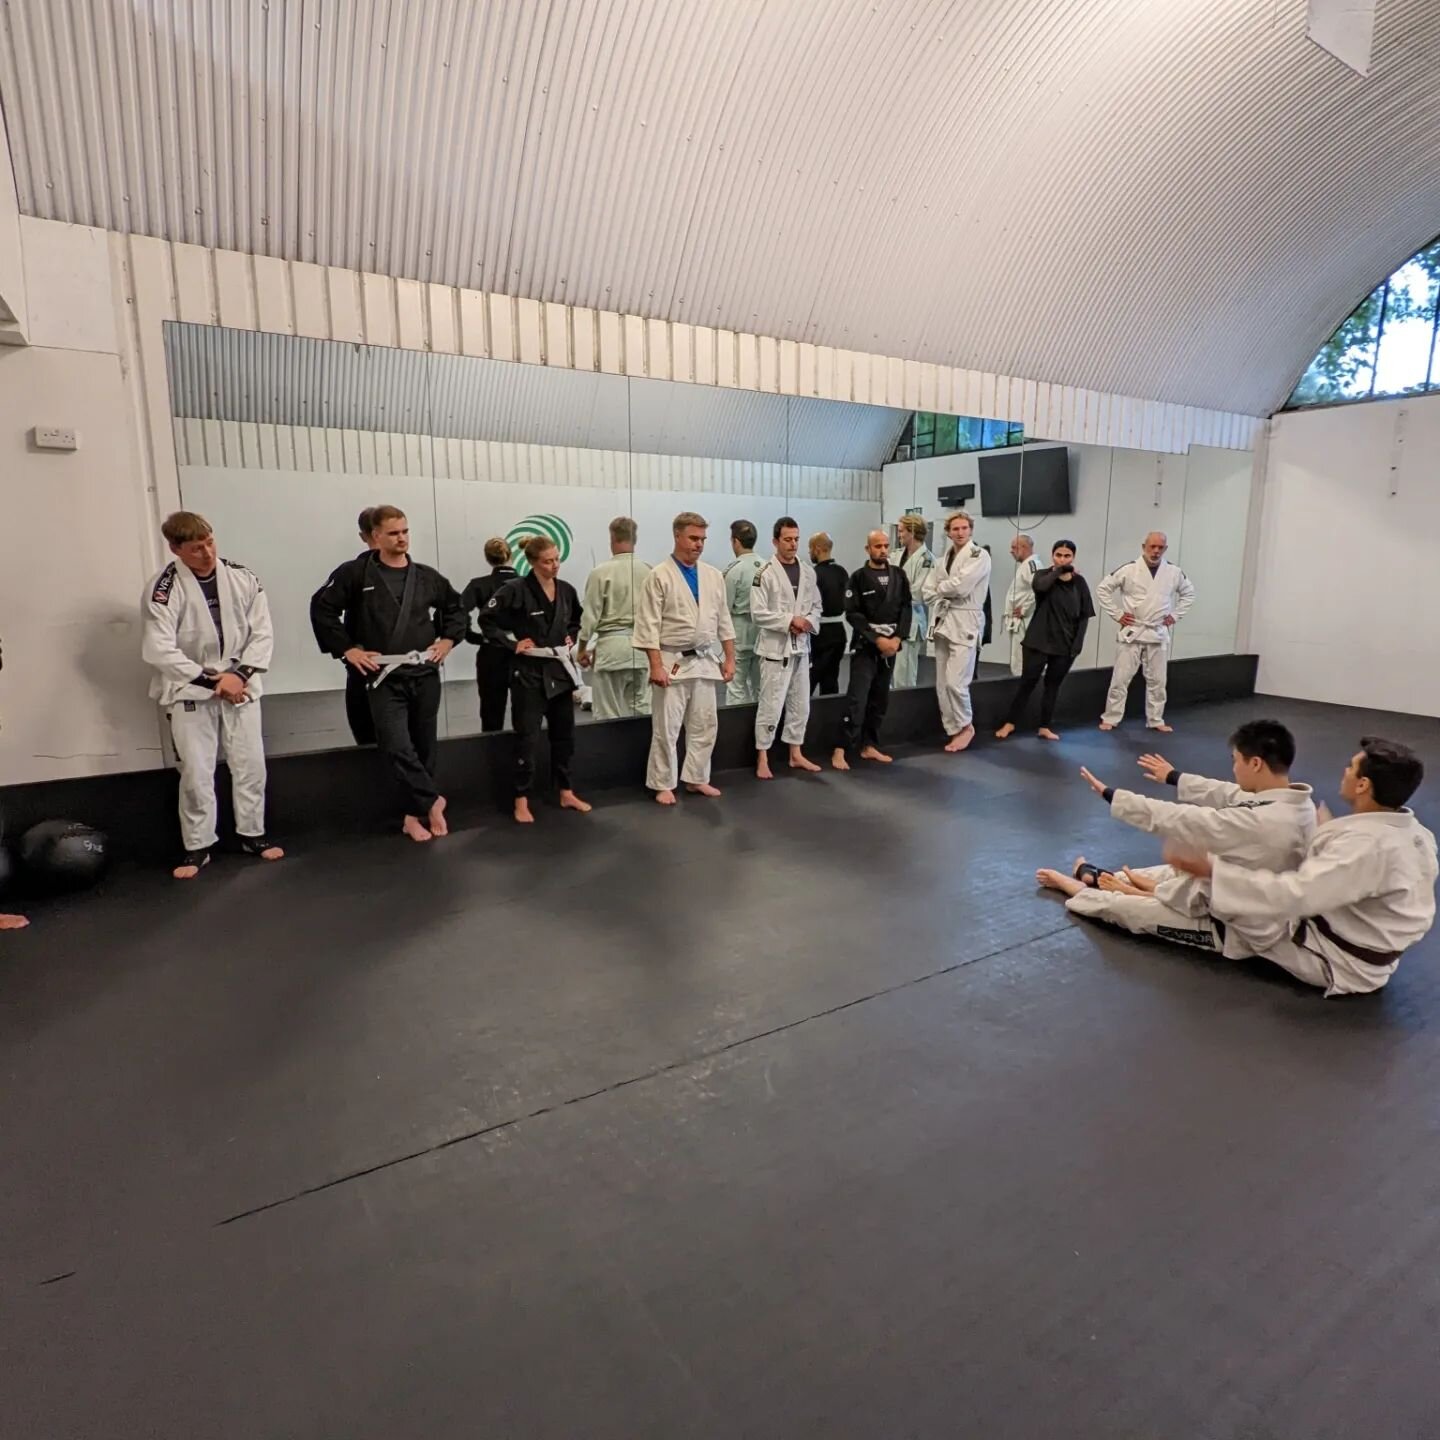 We have come to the end of our first beginners course and it has been a massive success 😊 

Make sure to come down for next month's to learn the fundamentals of Brazilian Jiu-Jitsu and join the Wave Community

Link in the bio
.
.
.
.
.
#thewaveway #